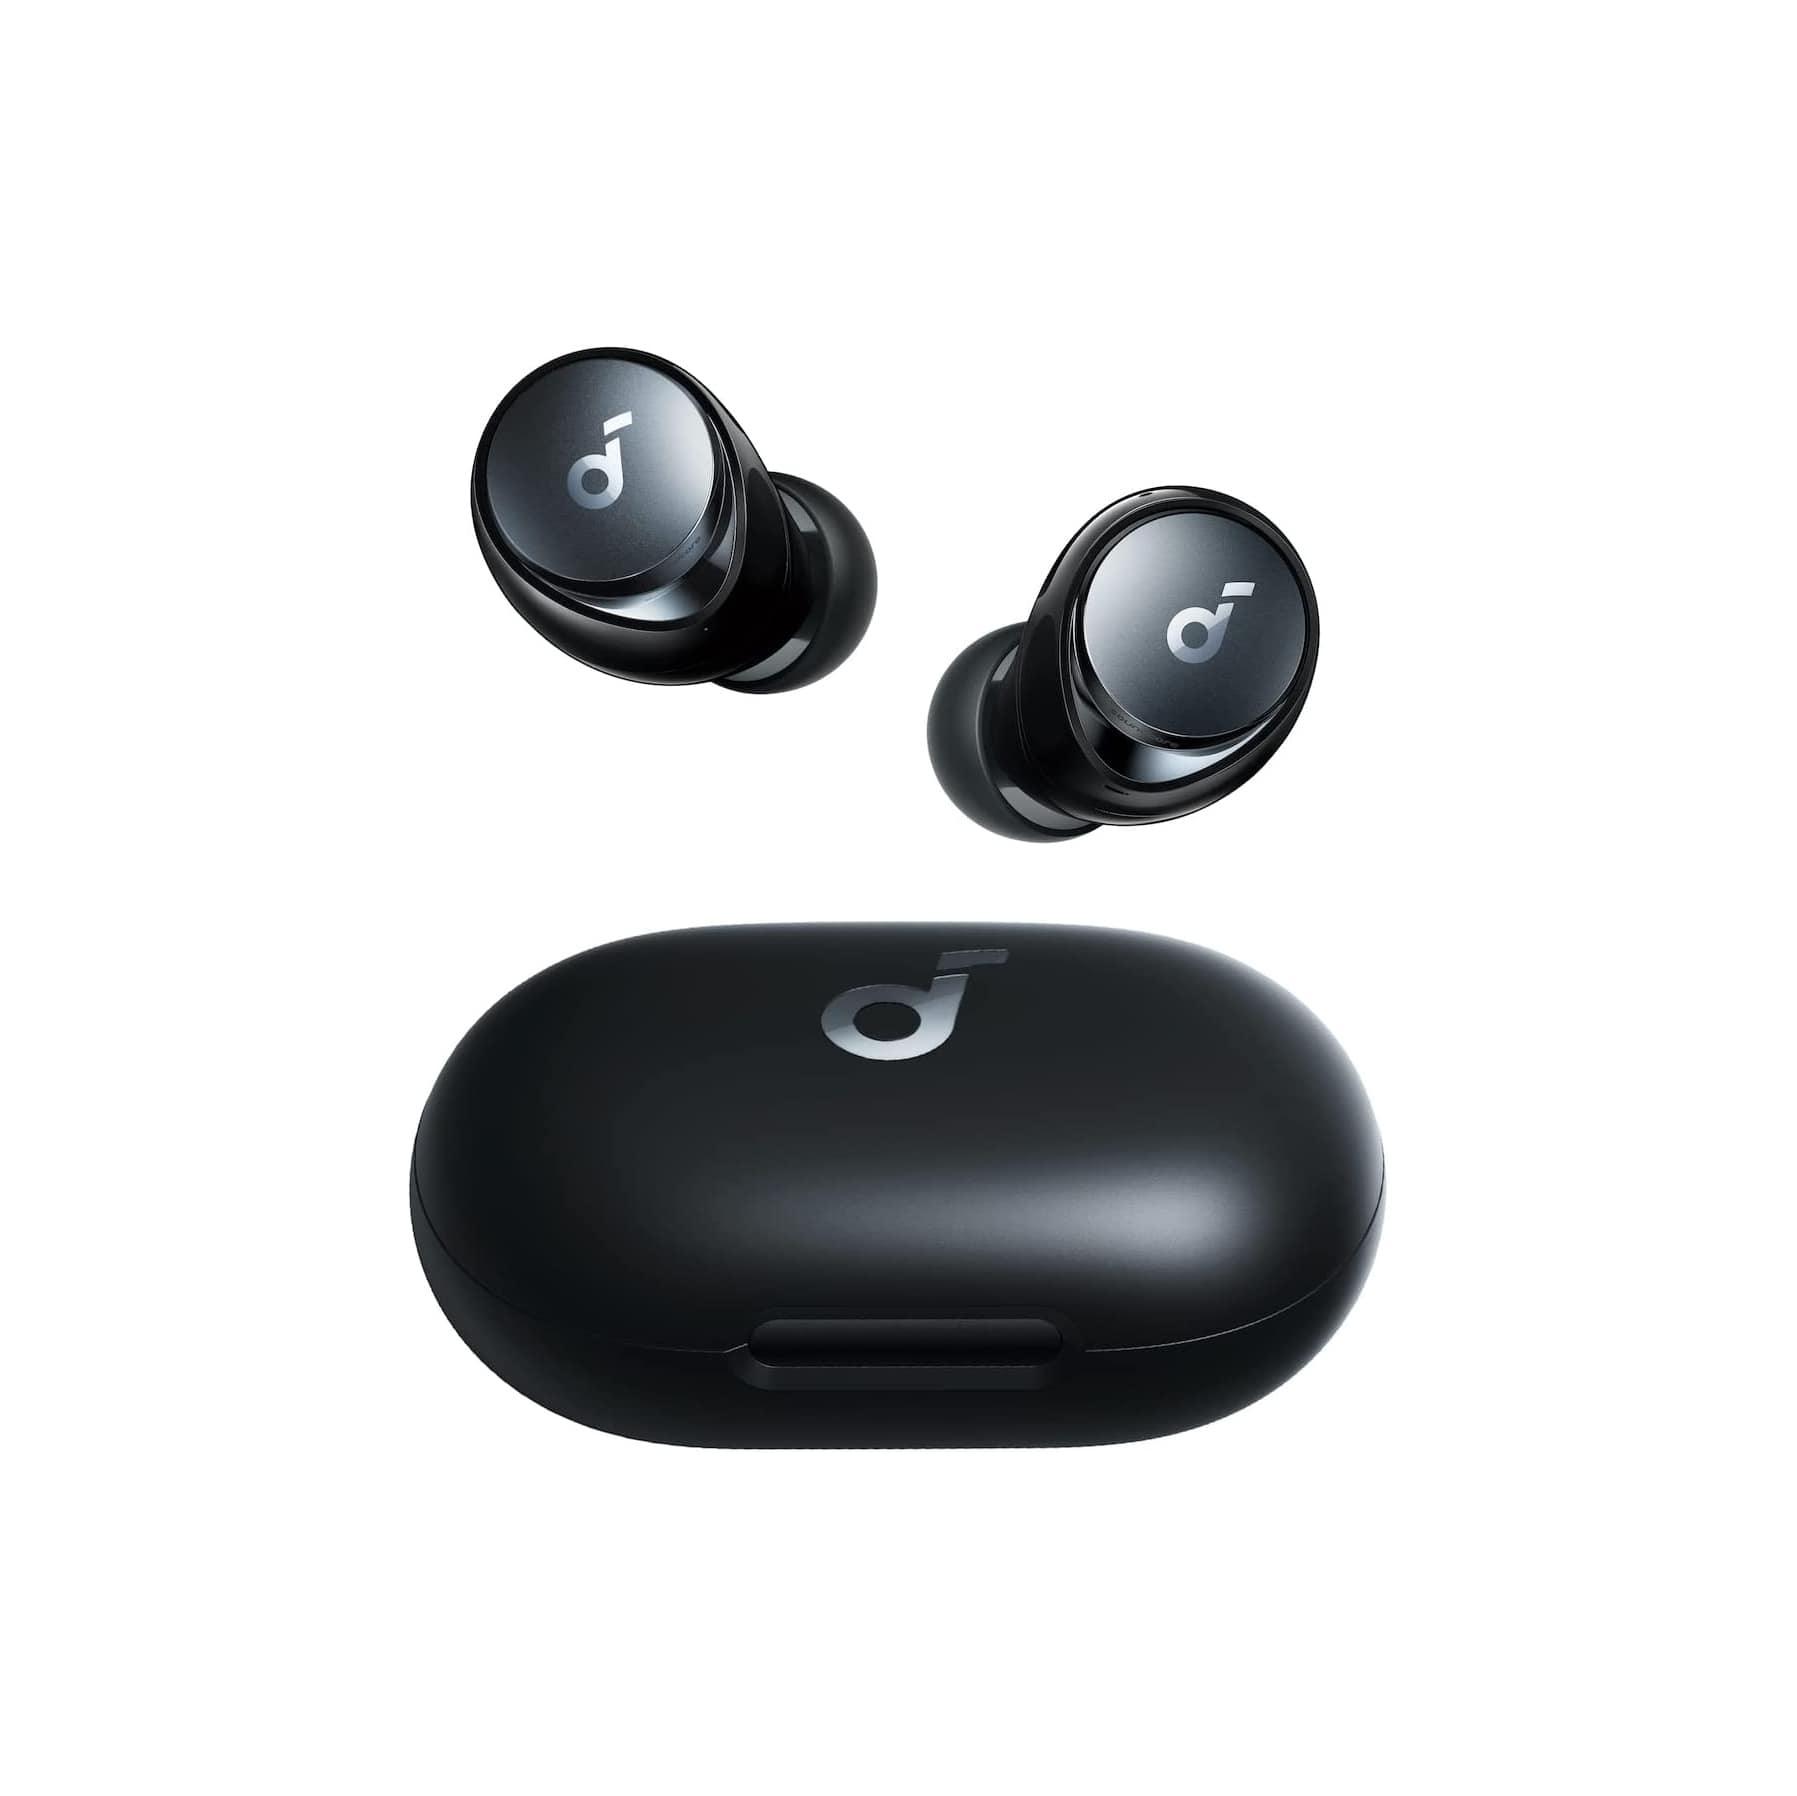 Anker Soundcore Space A40 Auto-Adjustable Active Noise Cancelling Wireless Earbuds – Black Audio  |  True Wireless Earbuds  |